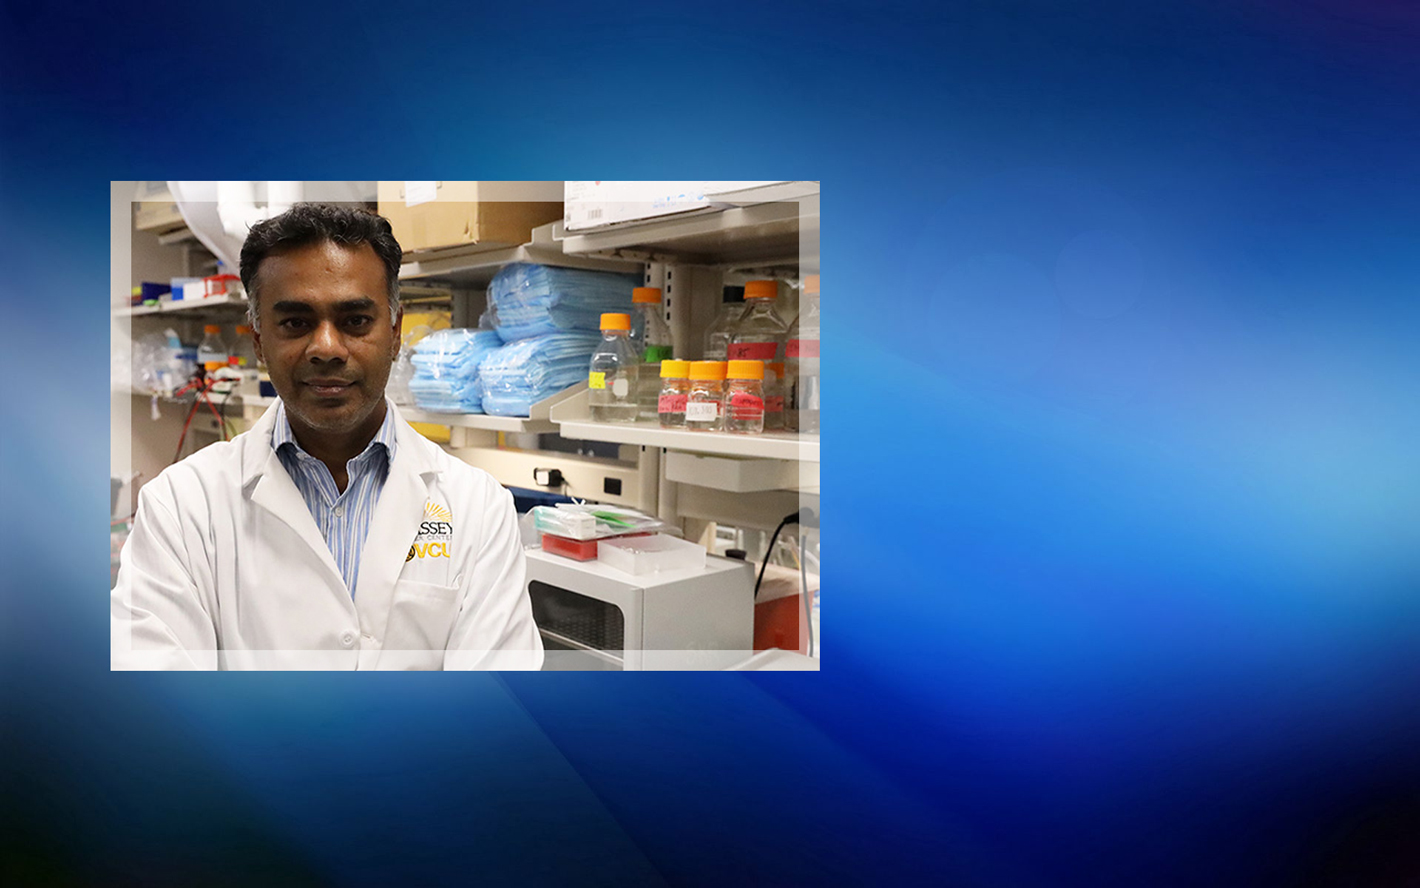 VCU Massey Cancer Center scientist Senthil Radhakrishnan, Ph.D., has been awarded $792,000 to explore a new approach to treating TNBC
